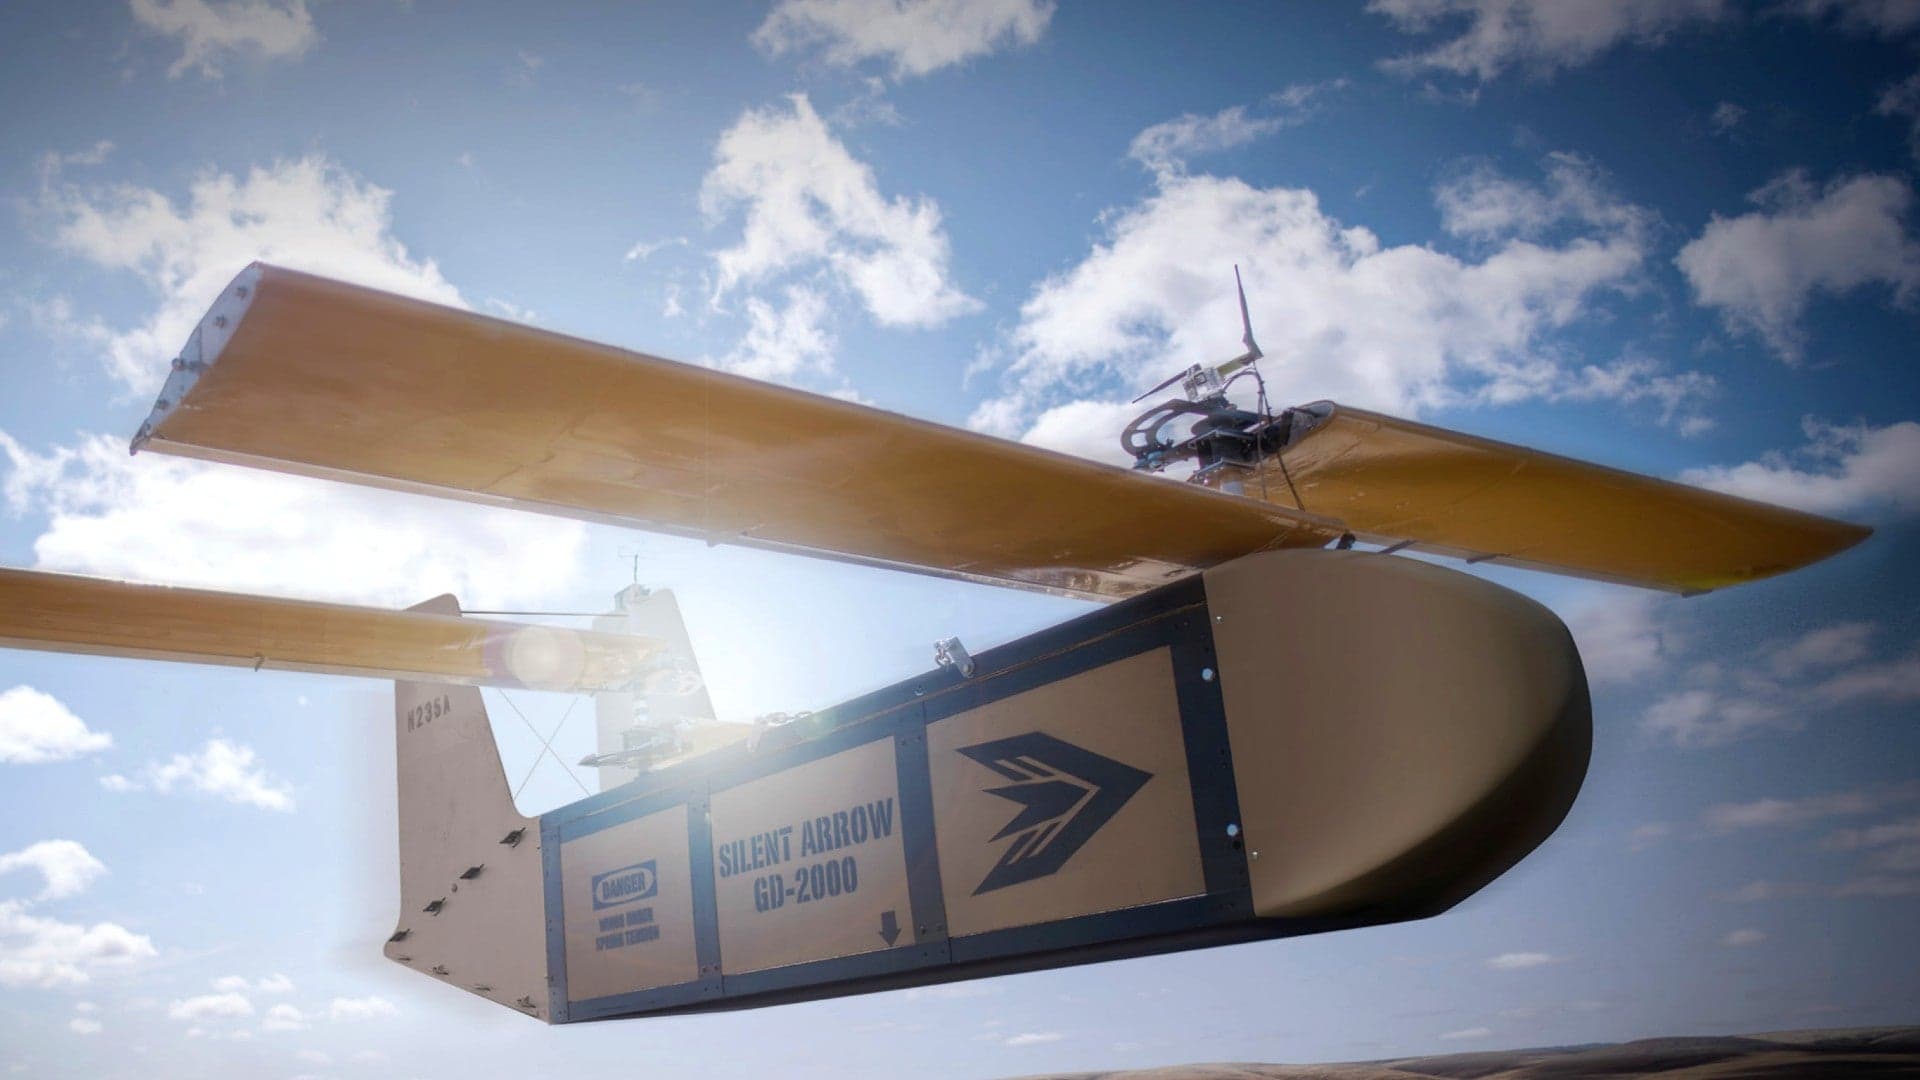 Autonomous Resupply Gliders Made Successful Deliveries On Their First Overseas Deployment